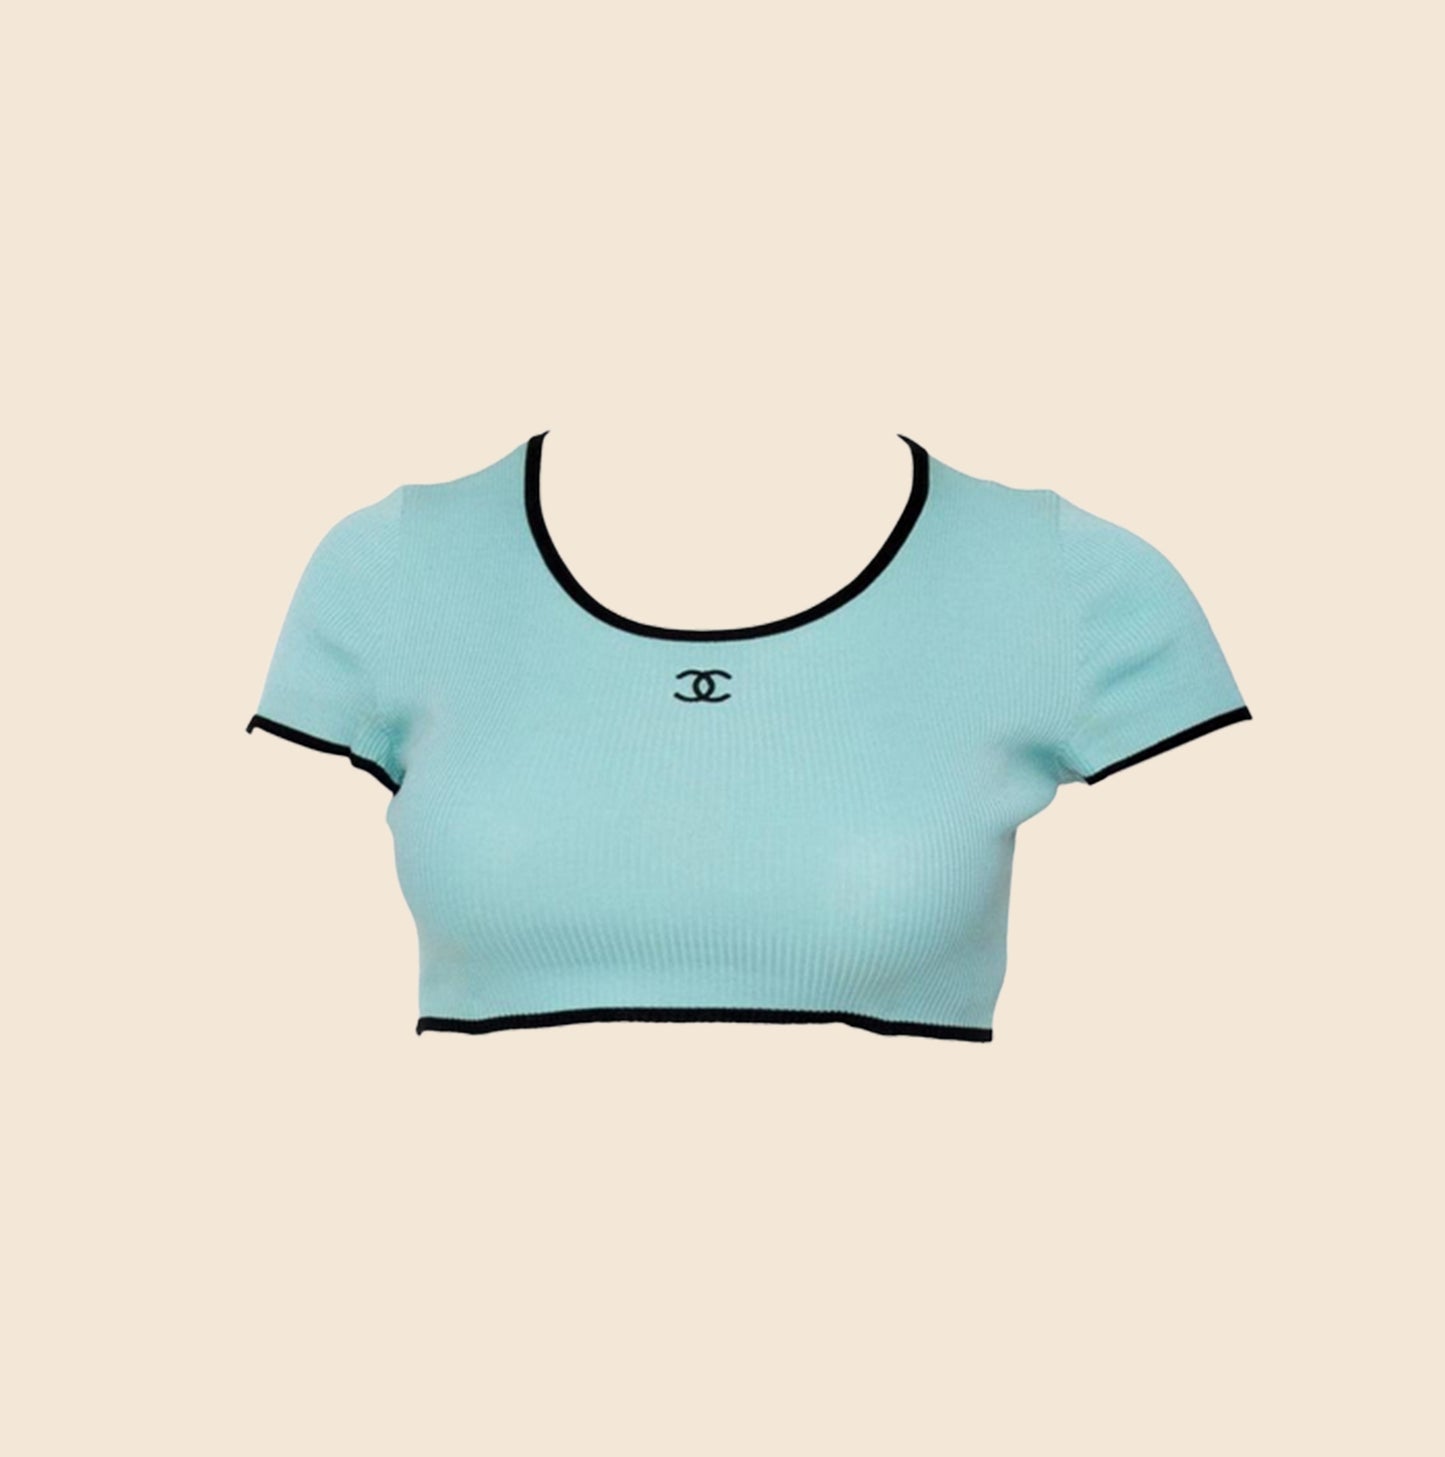 CHANEL 1990s TURQUOISE CC LOGO CROP TOP